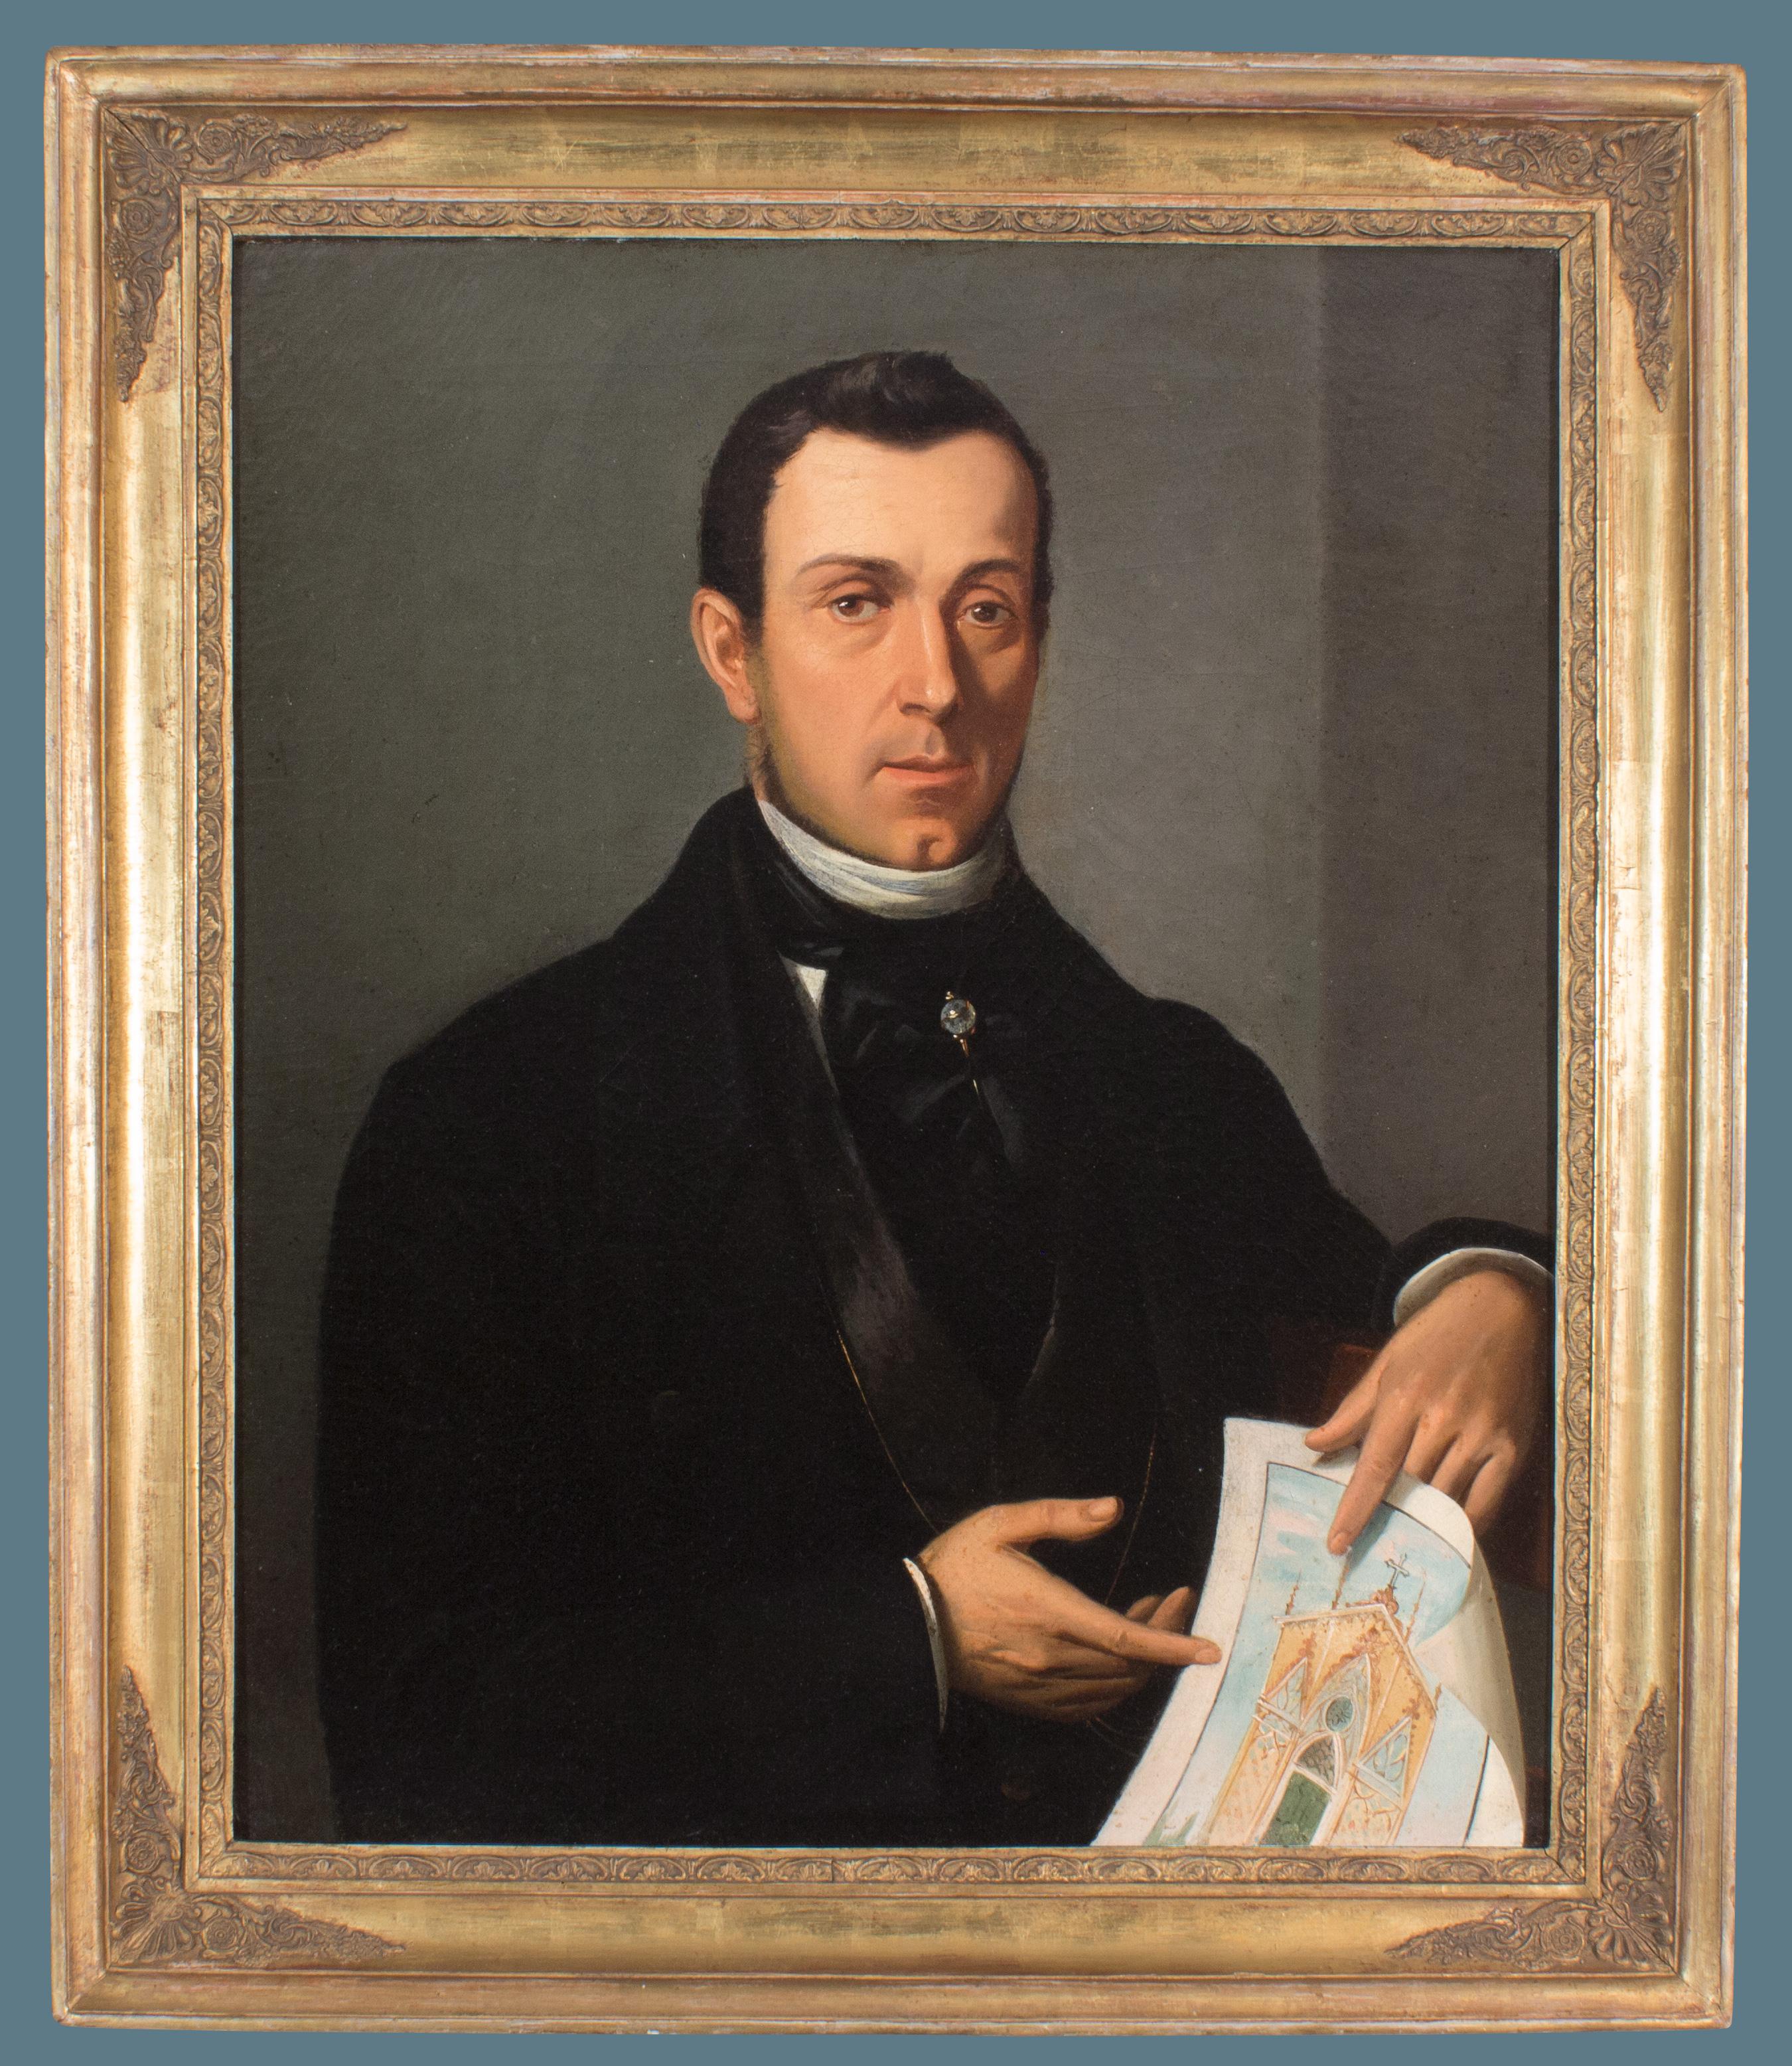 Portrait of a Man with Architectural Drawing by a European Artist